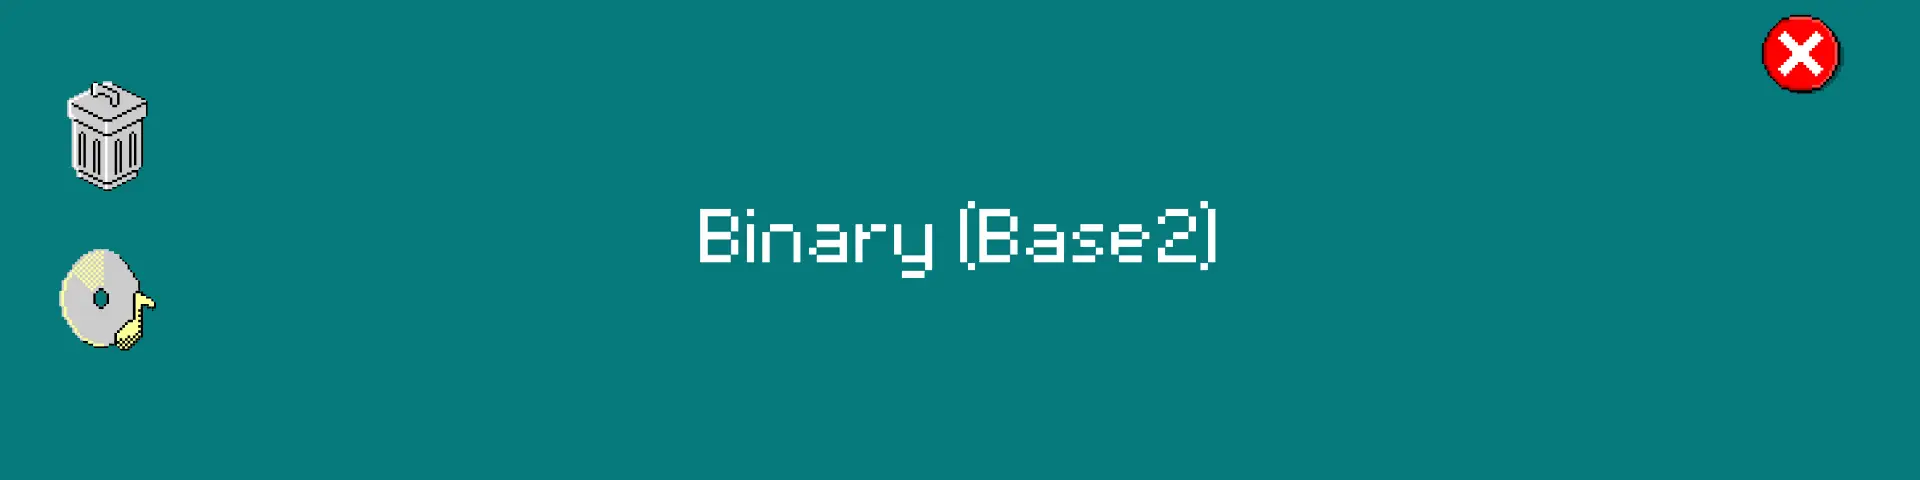 This article explains the concept of Binary or Base2 and demonstrates how to convert text into binary using ASCII encoding.